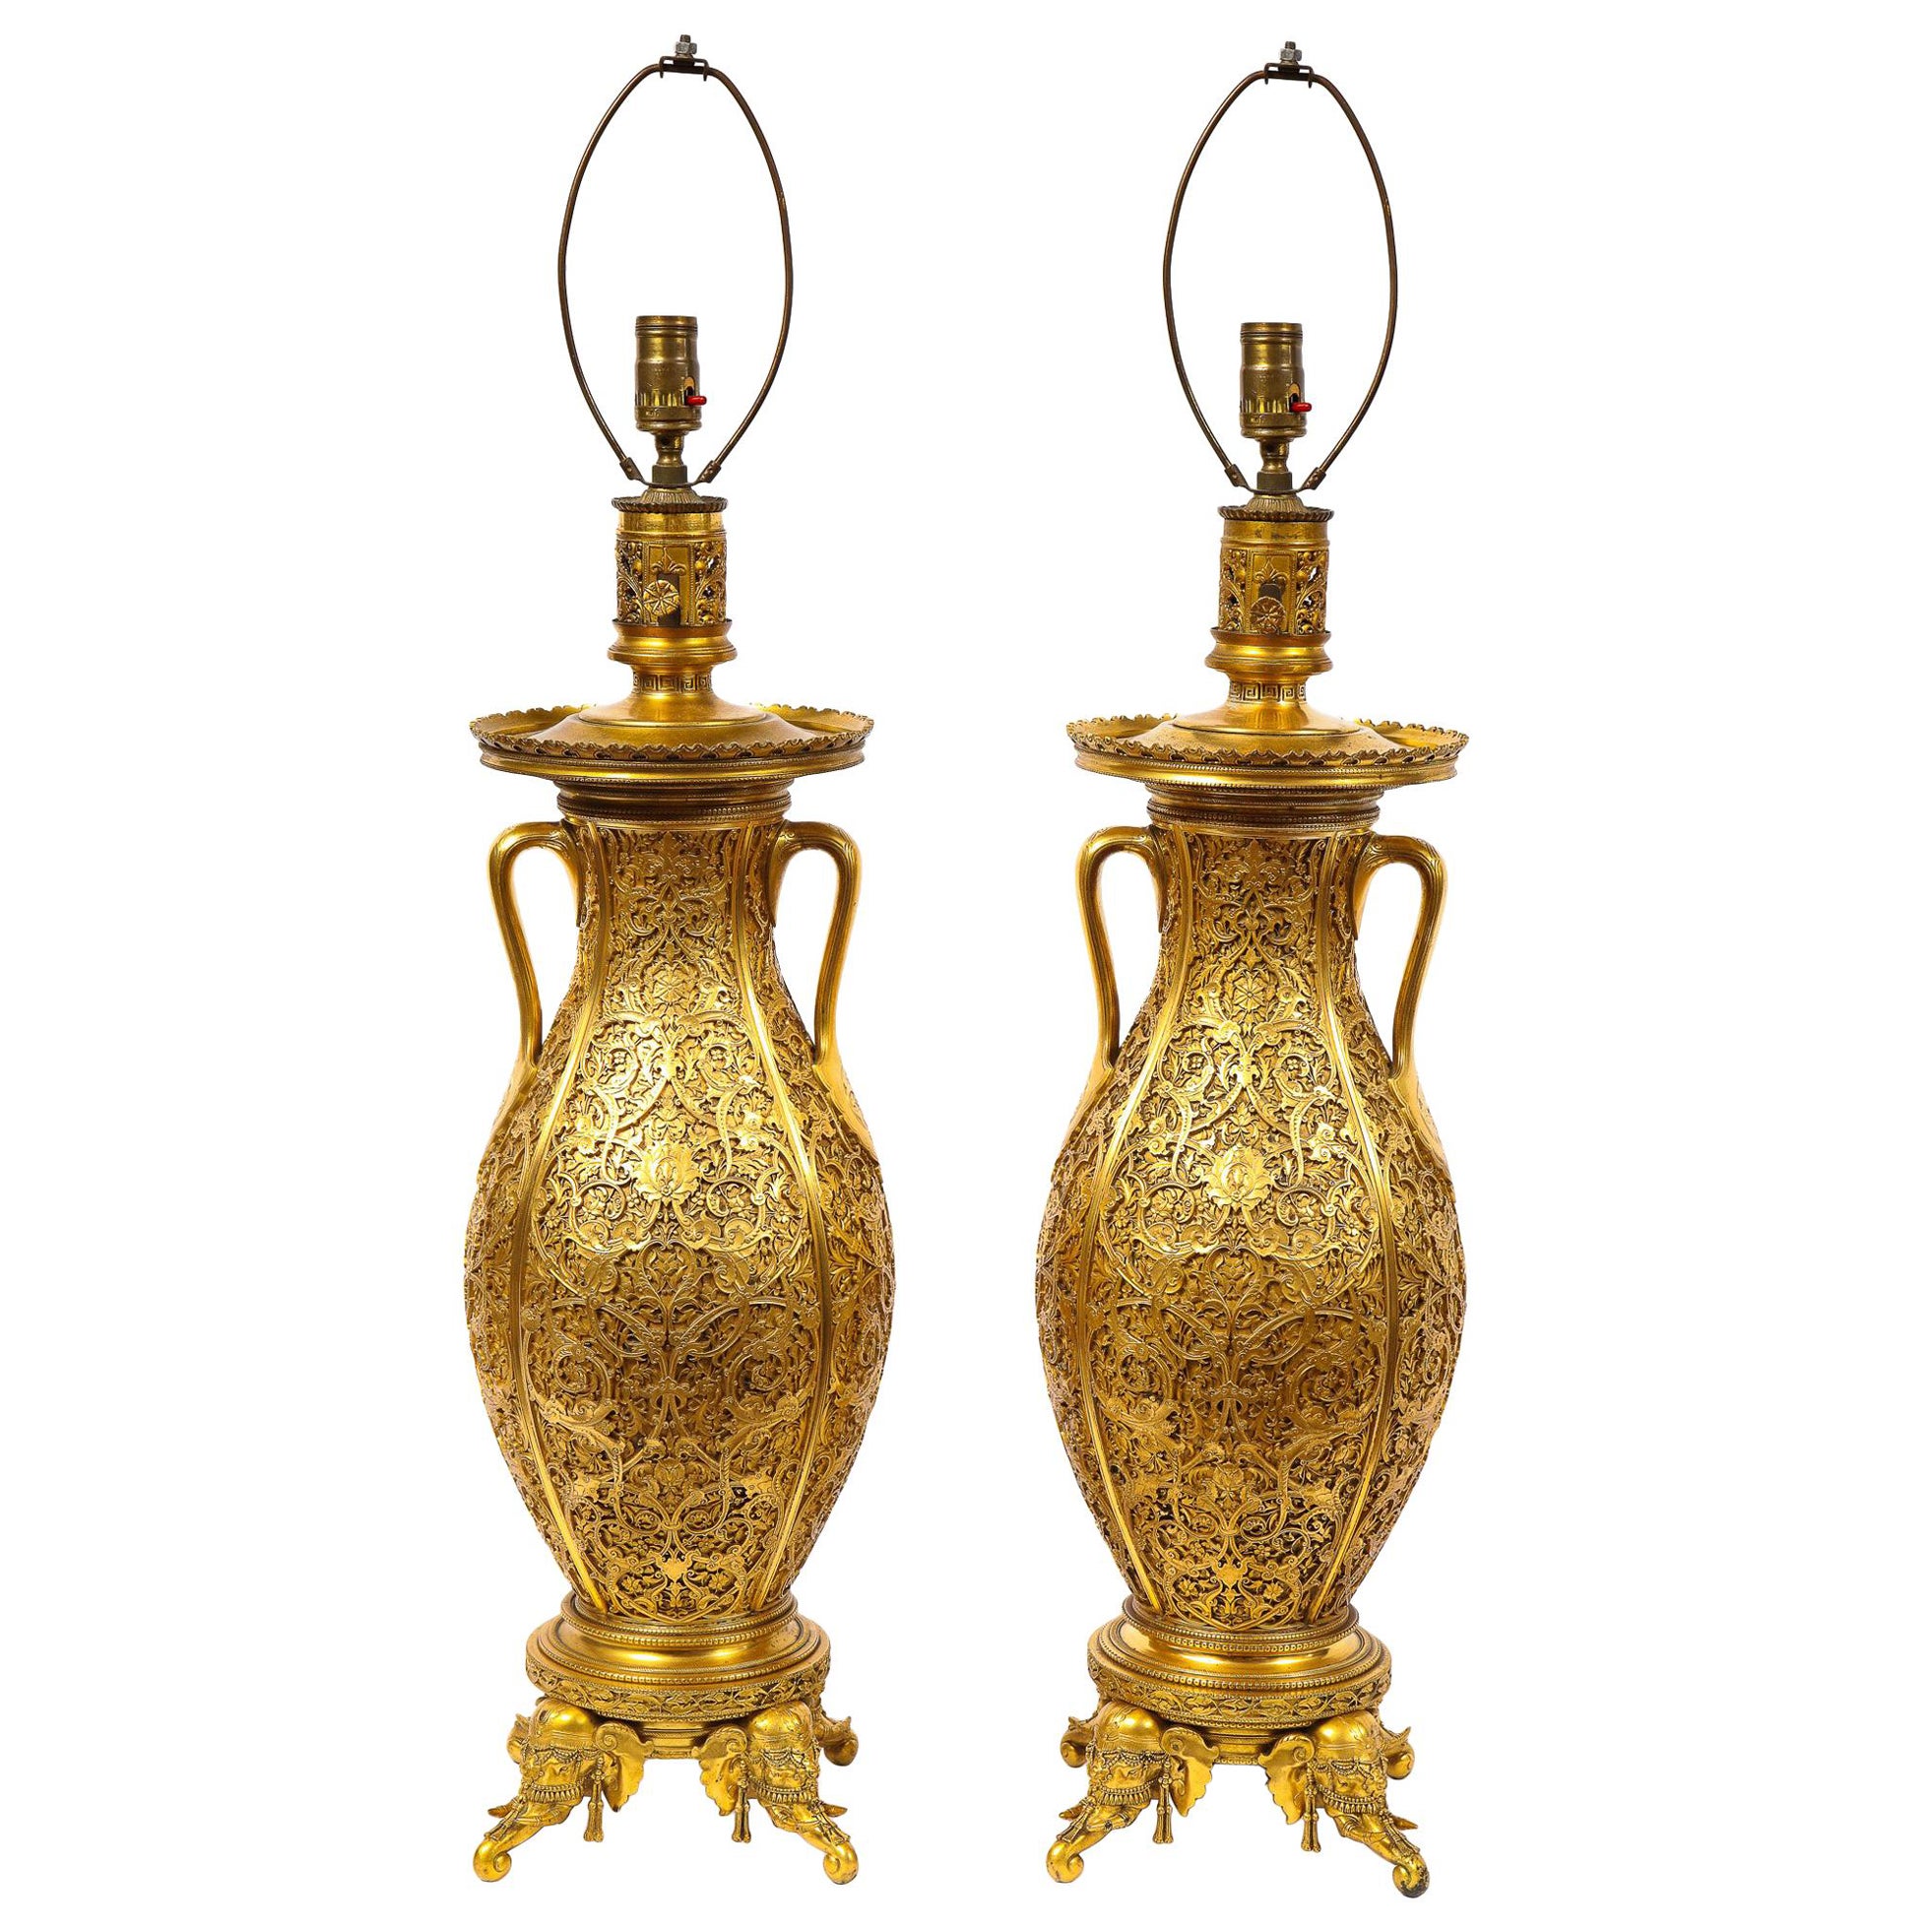 Pair of French Japonisme Ormolu Vases E. Lièvre, Executed by F. Barbedienne For Sale